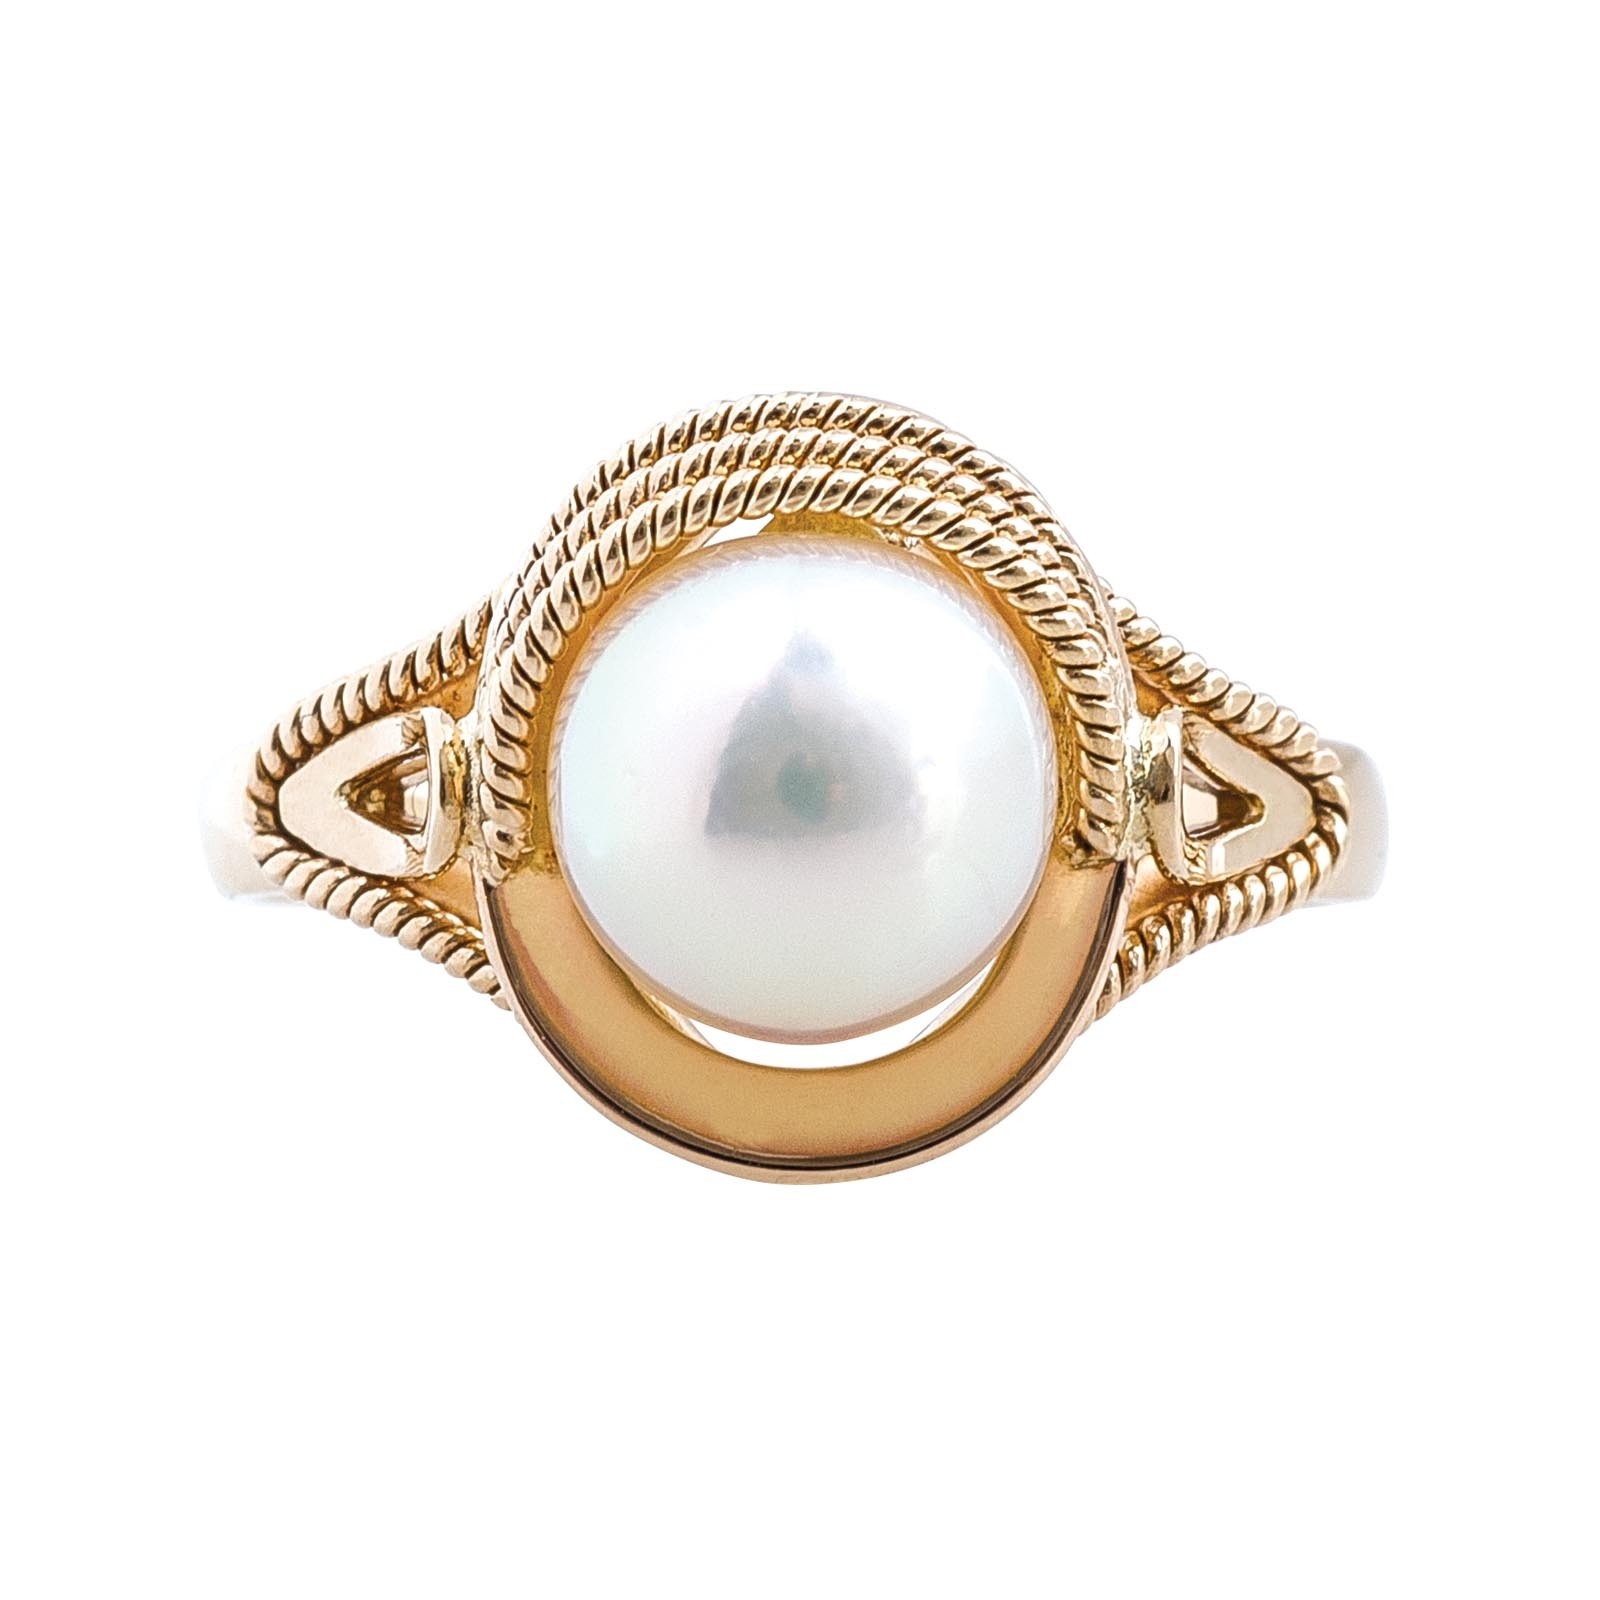 Yellow gold ring centered with a white pearl.